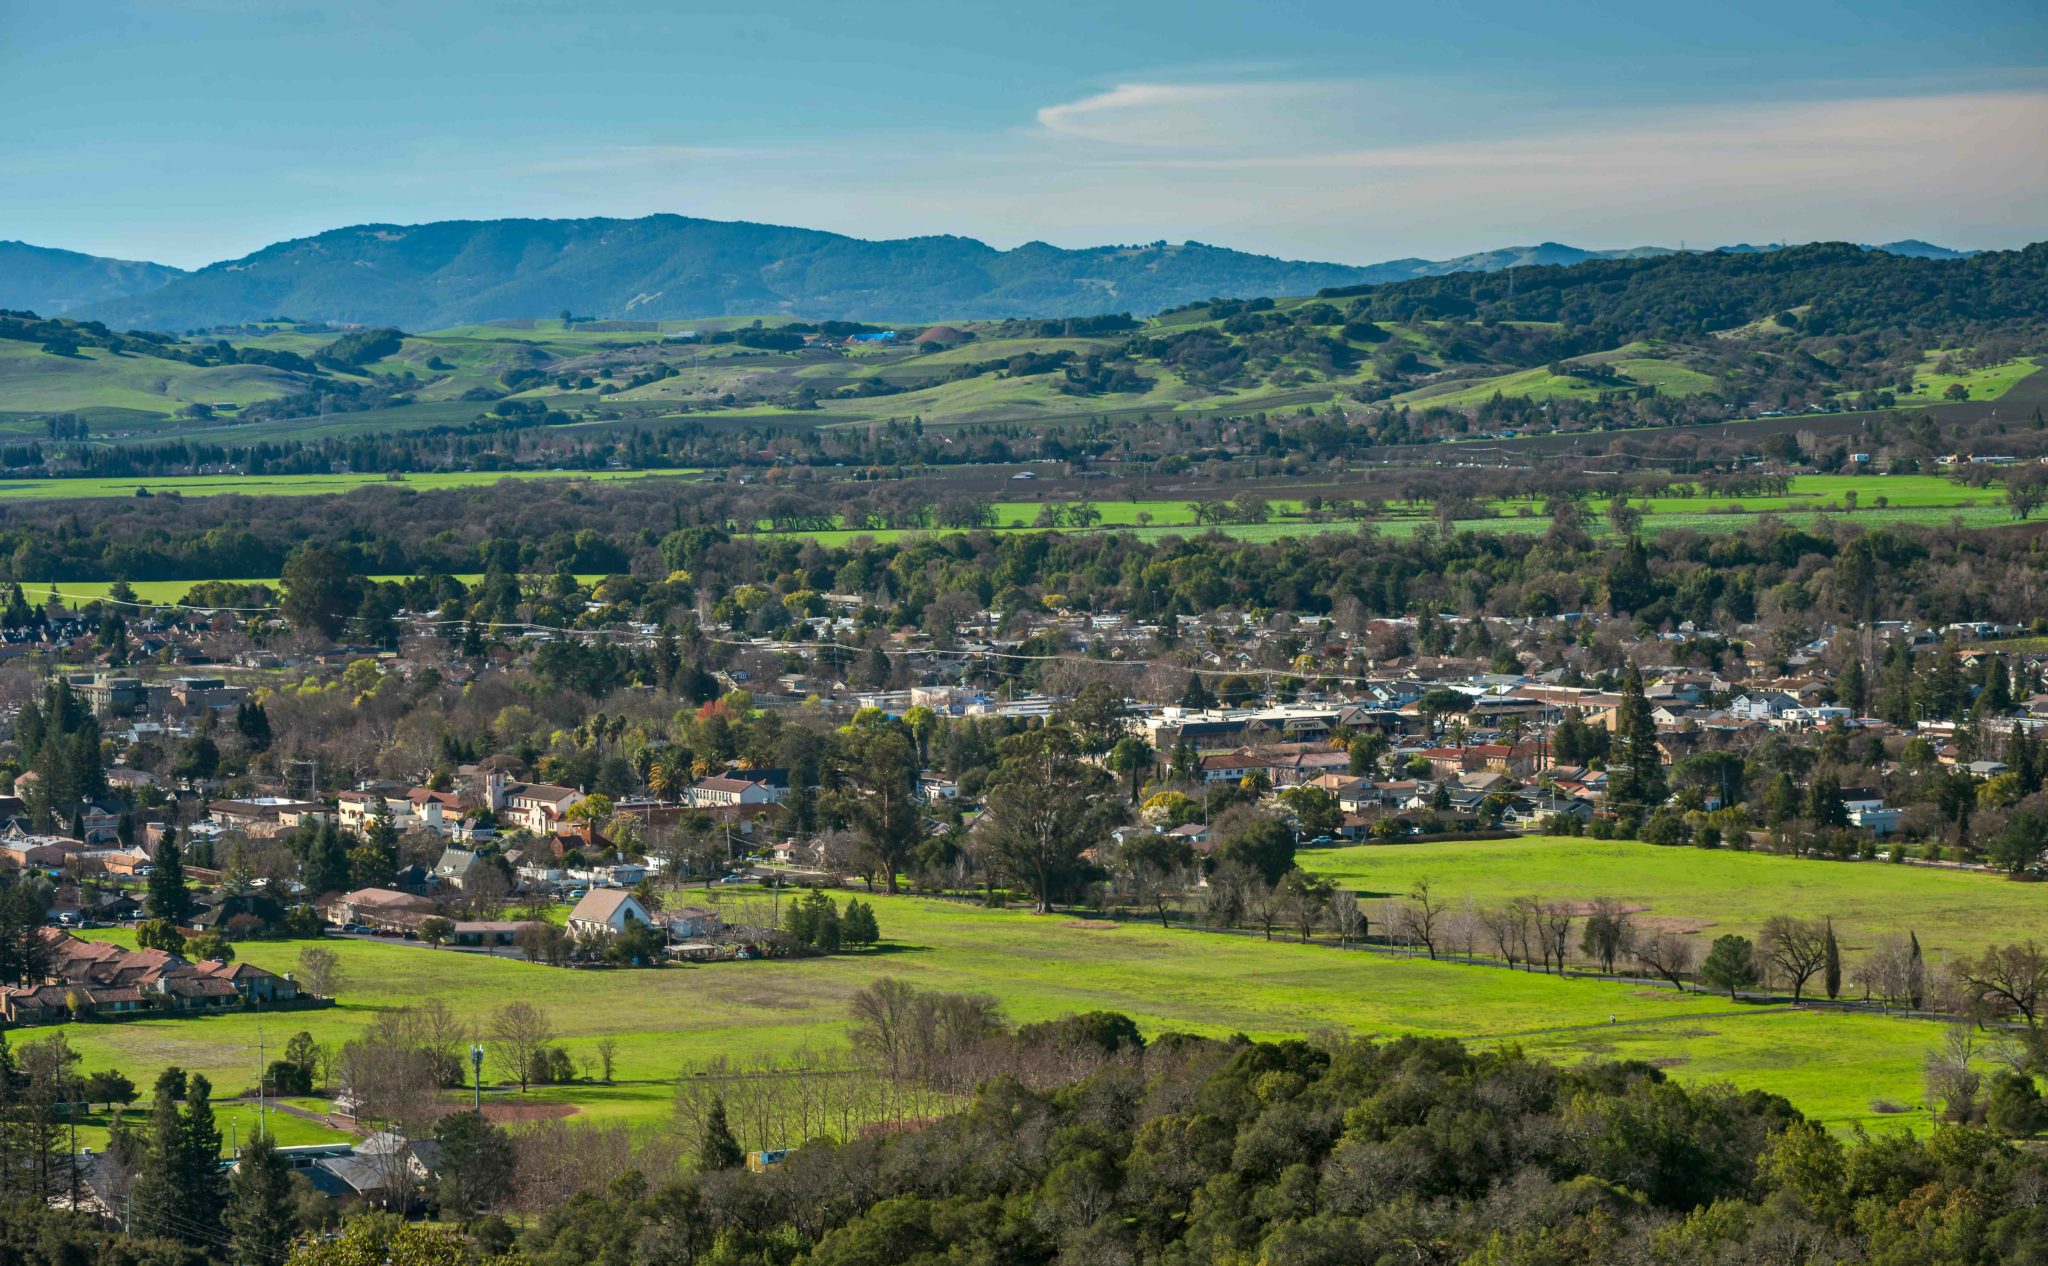 https://d1sve9khgp0cw0.cloudfront.net/wp-content/uploads/2021/03/town-of-Sonoma-Shutterstock-scaled.jpg